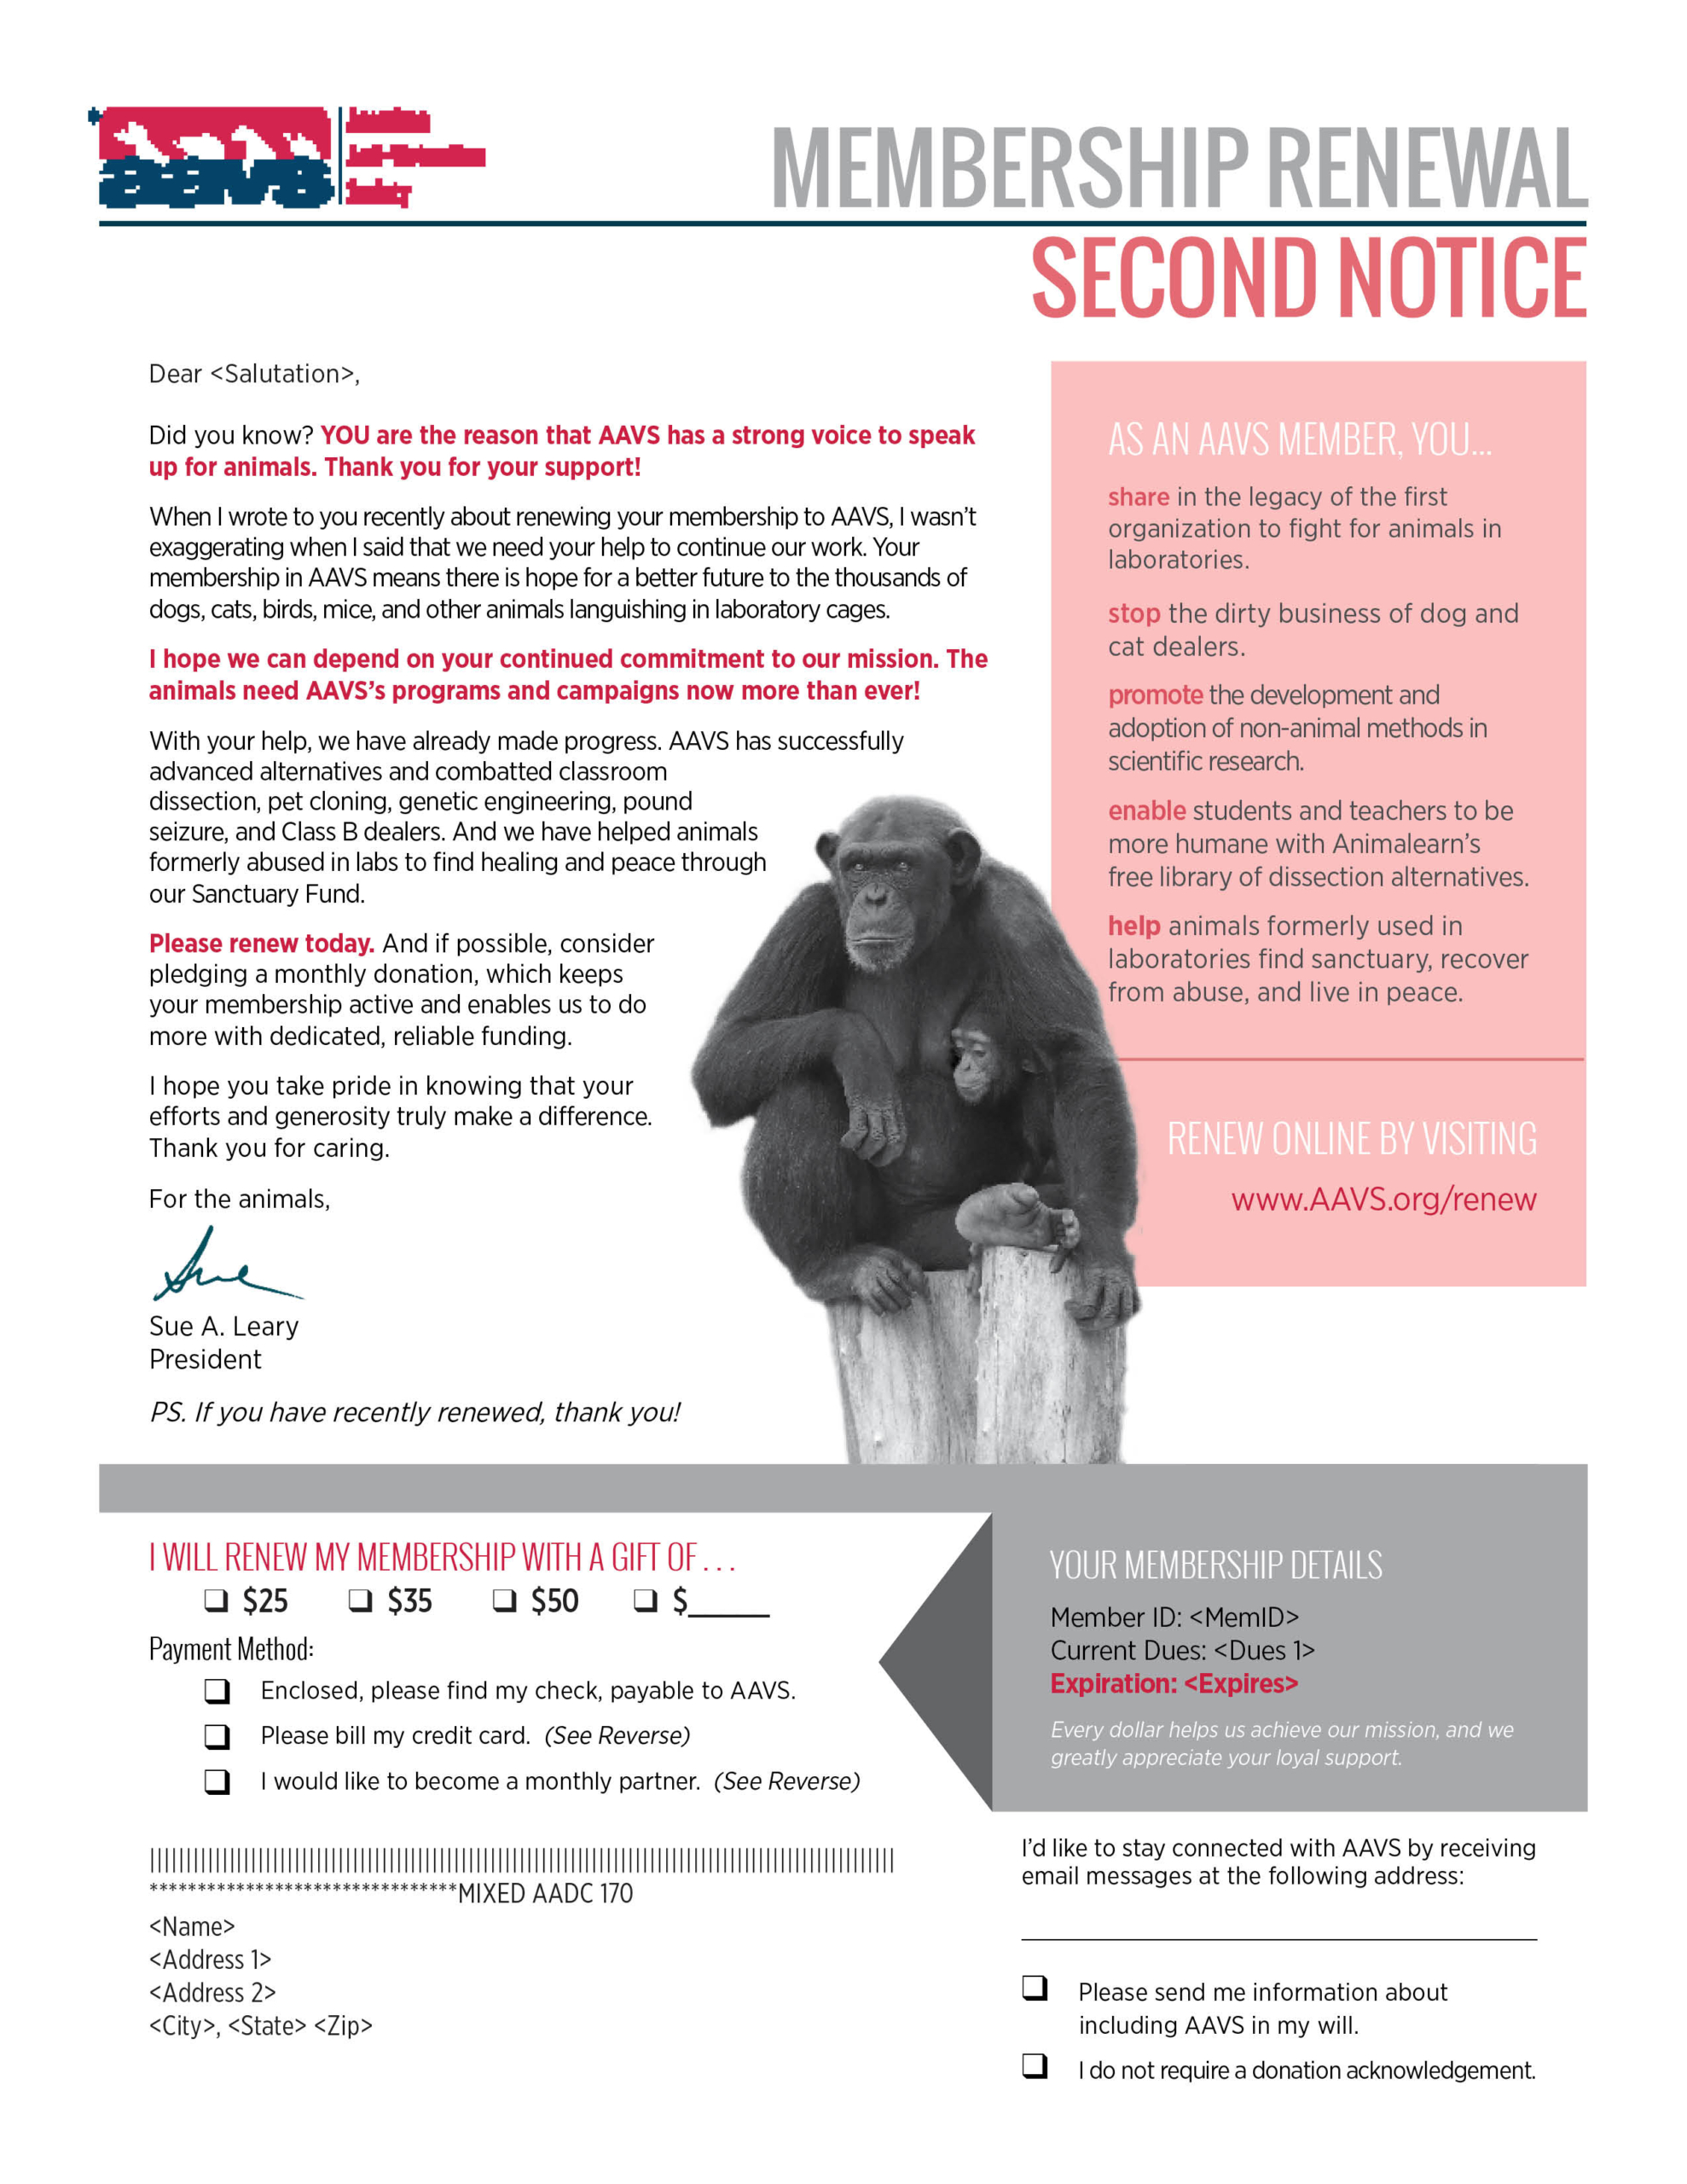 AAVS - Membership Renewal Mailing - Second Notice - Letter Front